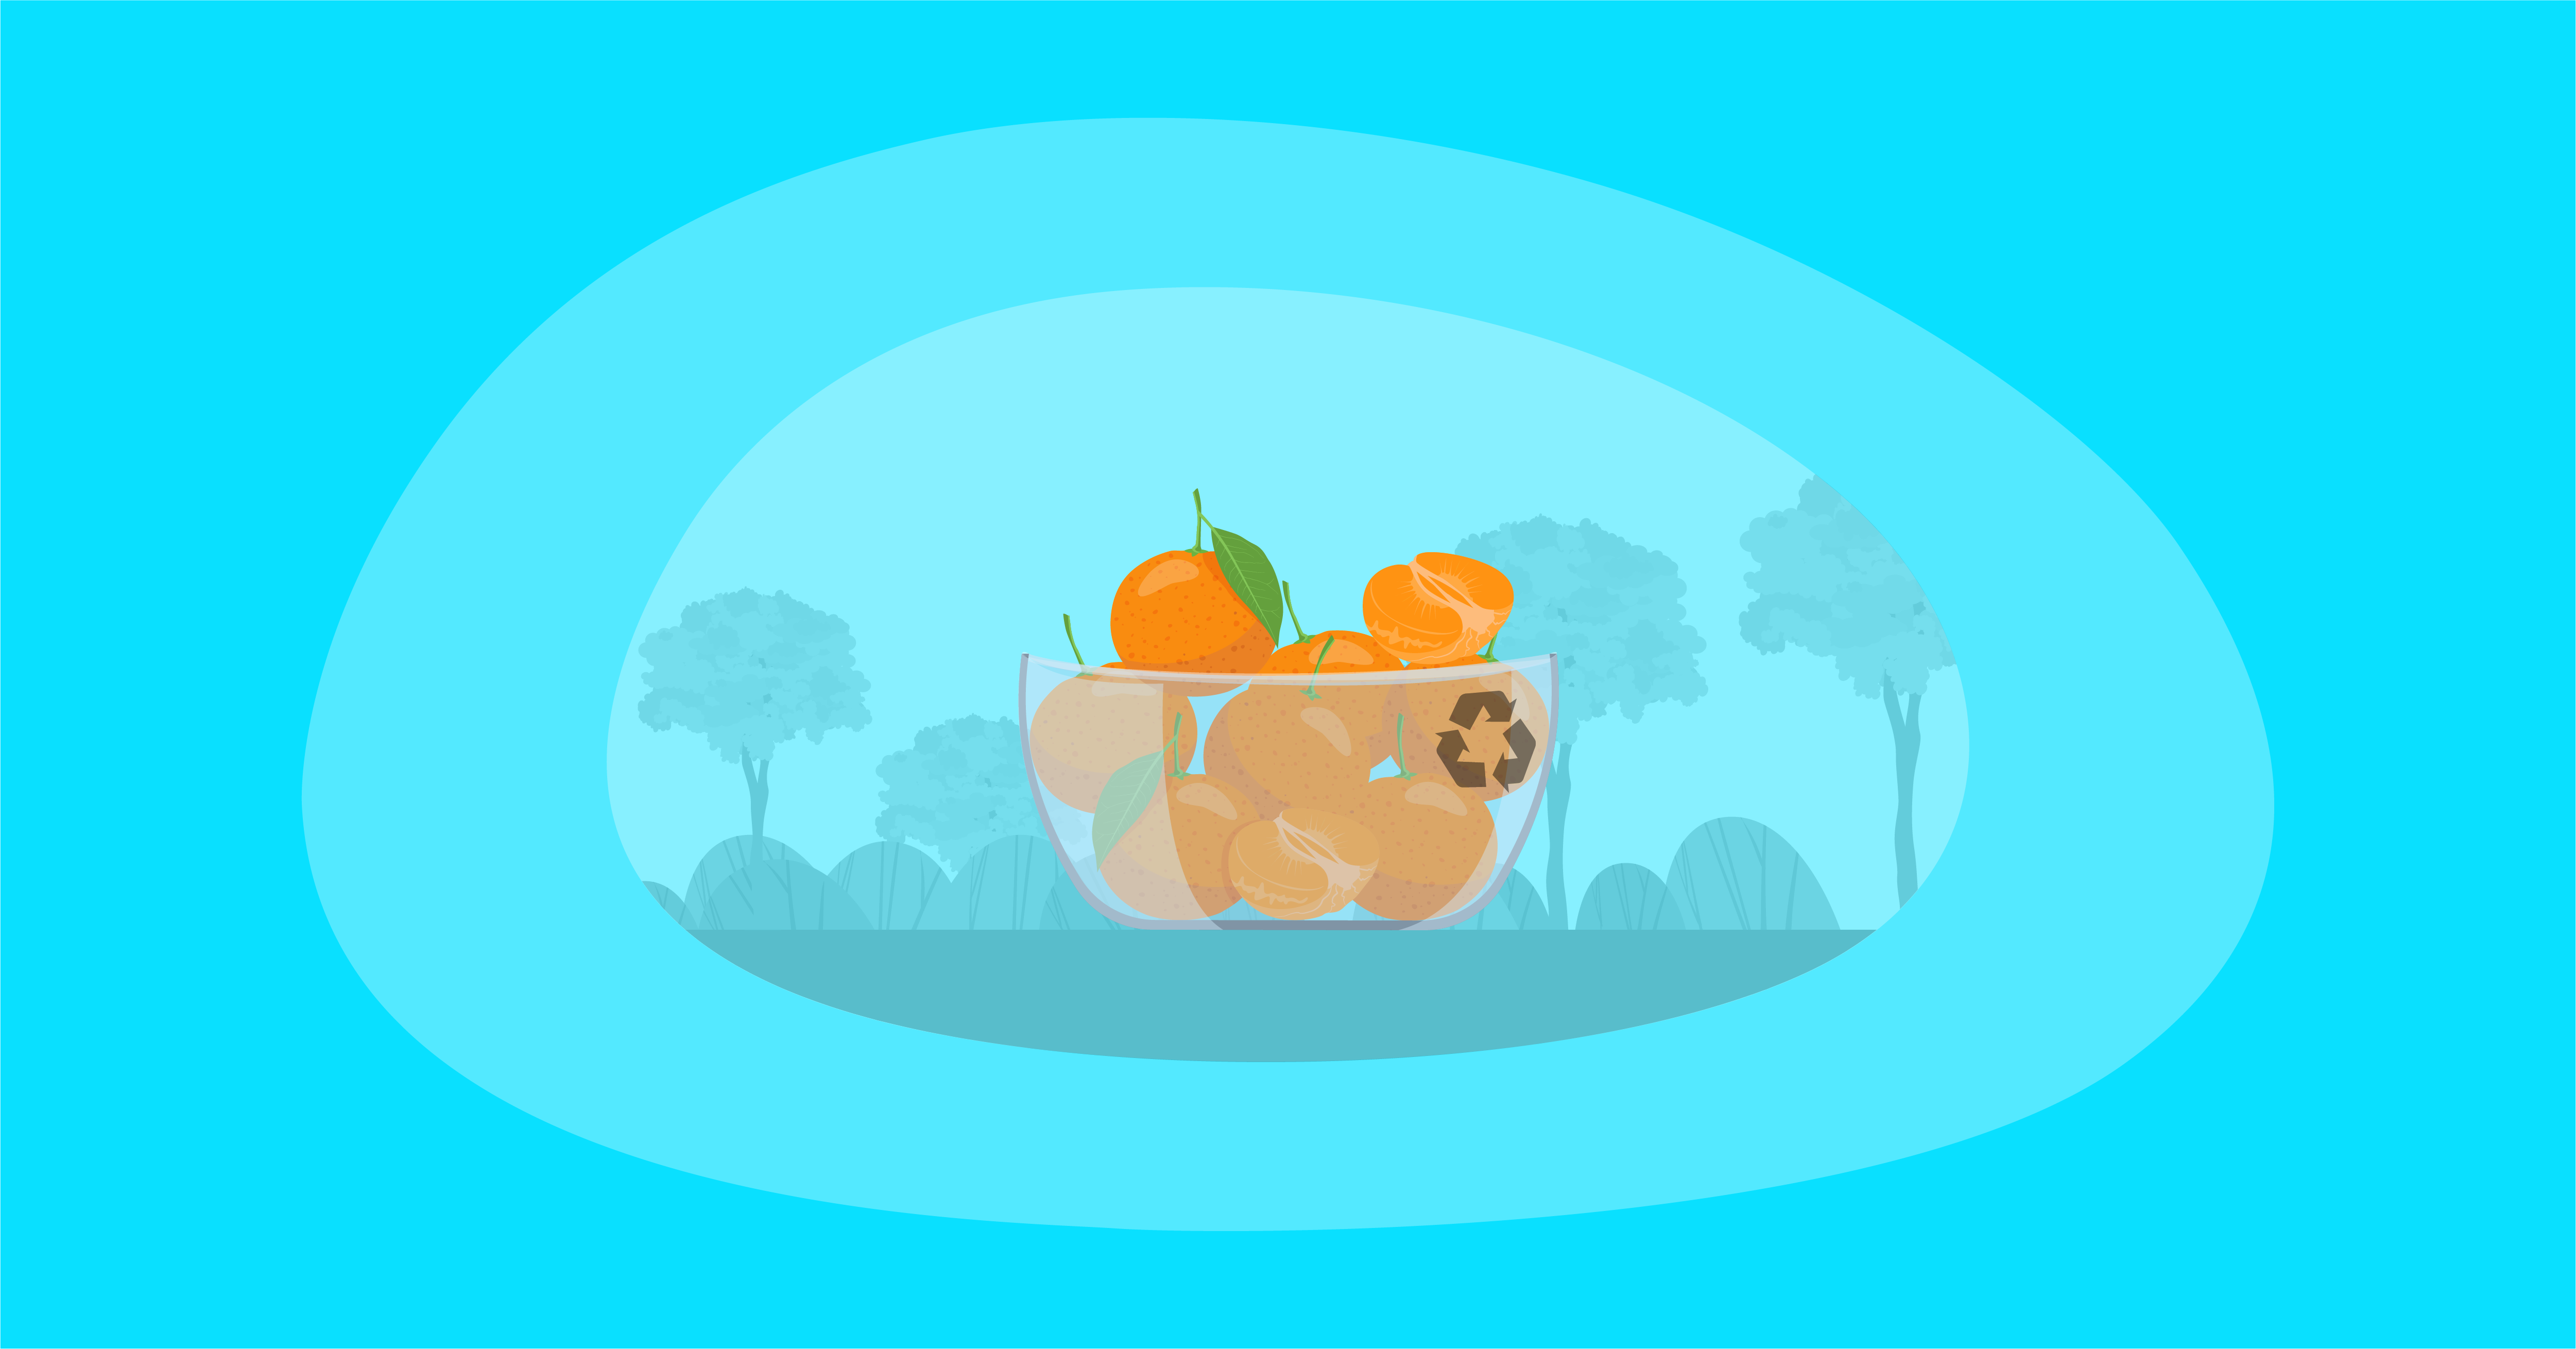 Illustration of clementines inside a glass bowl